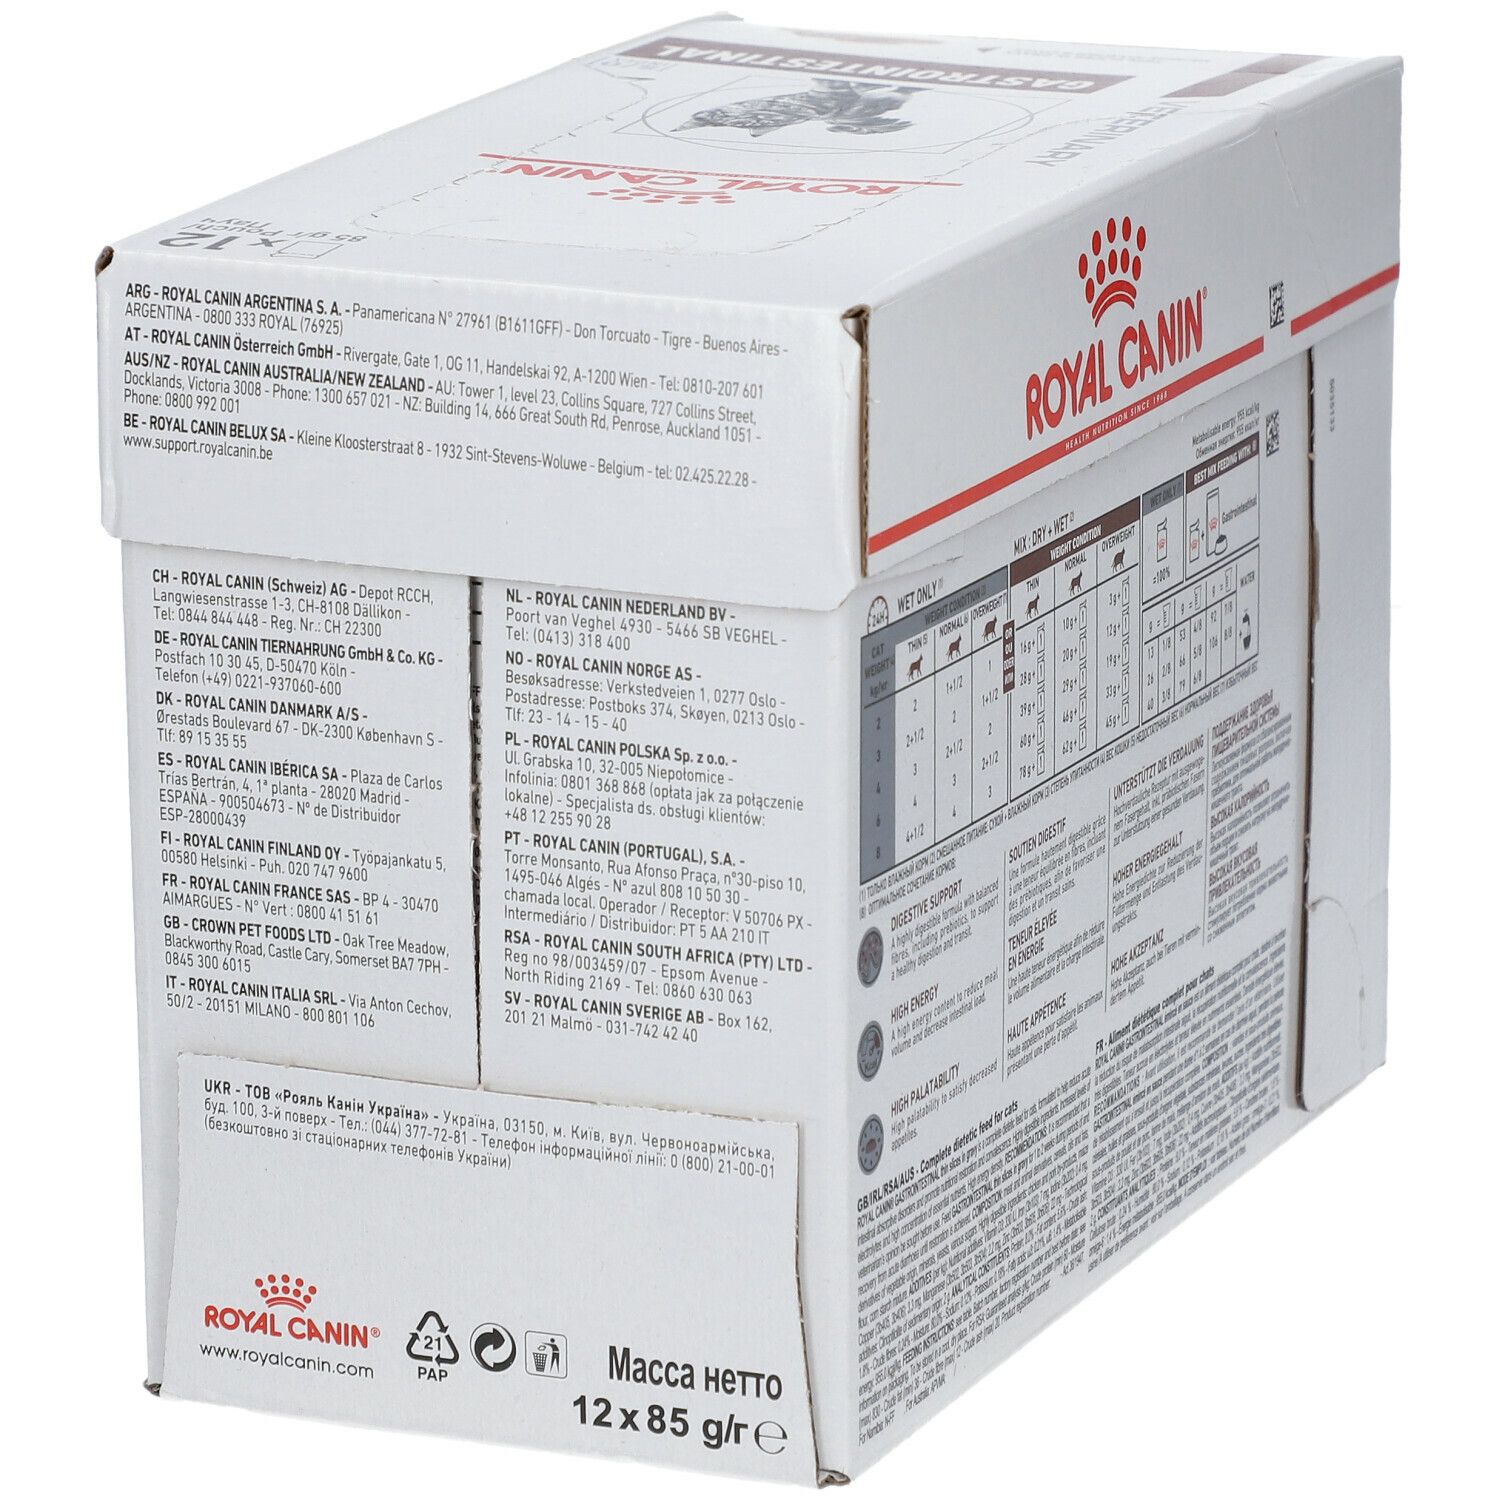 Royal Canin® Gastro Intestinal Low Fat Chat